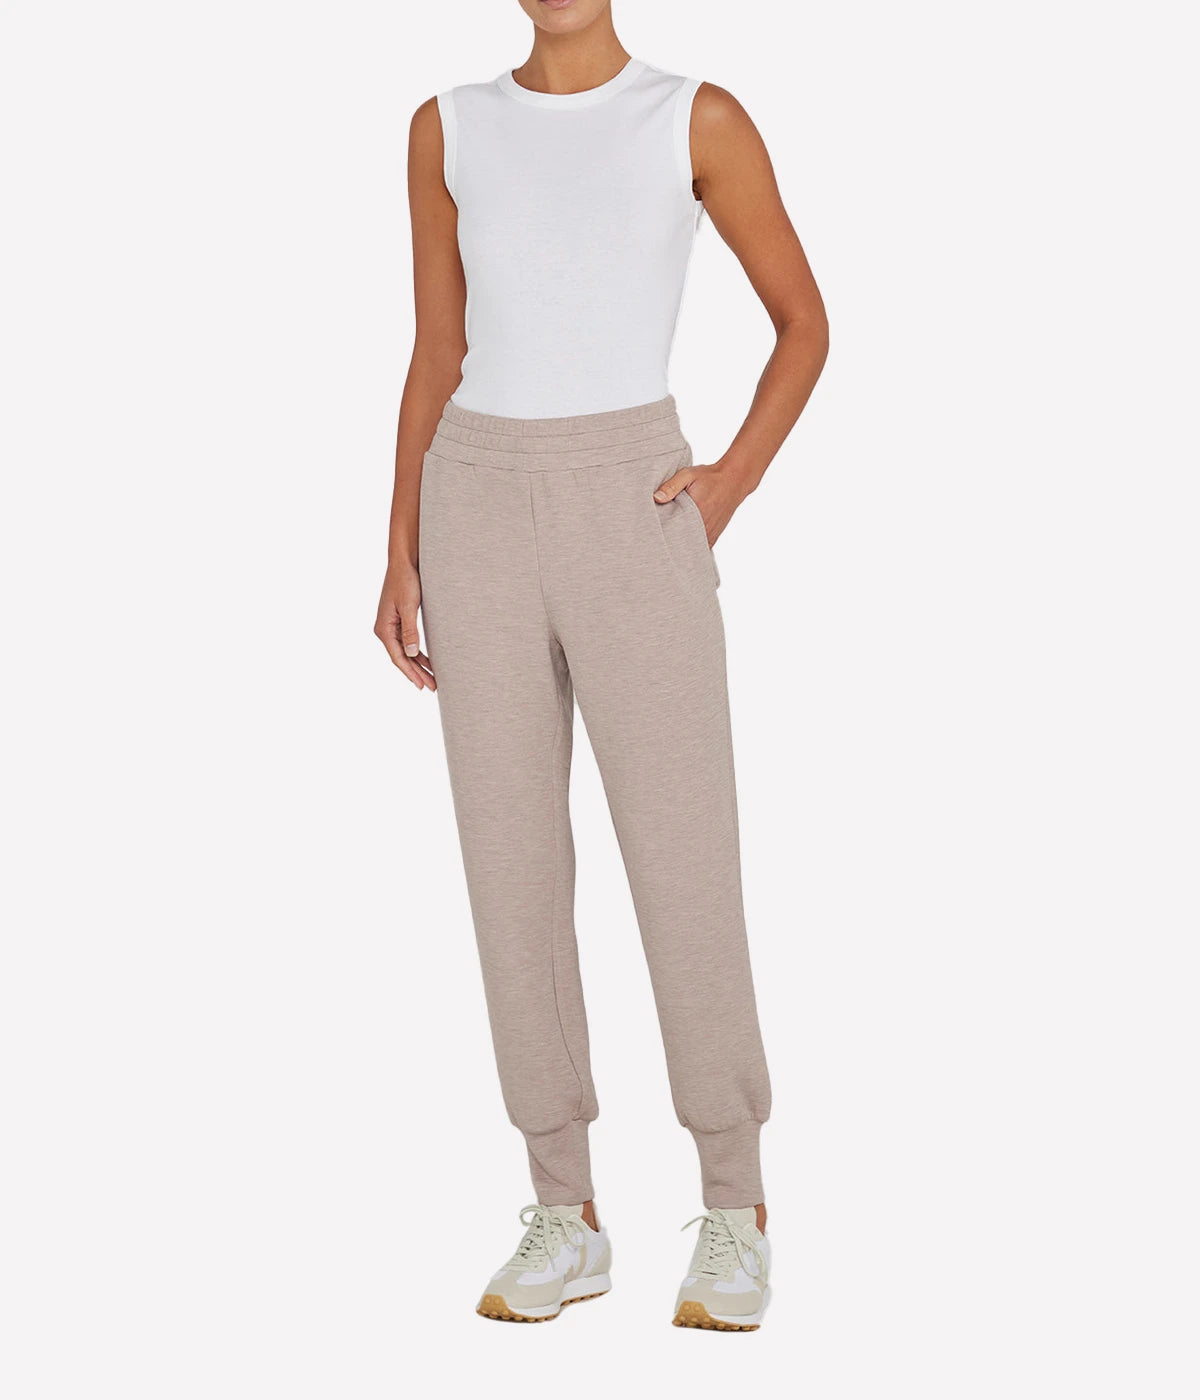 The Slim Cuff Pant in Taupe Mal